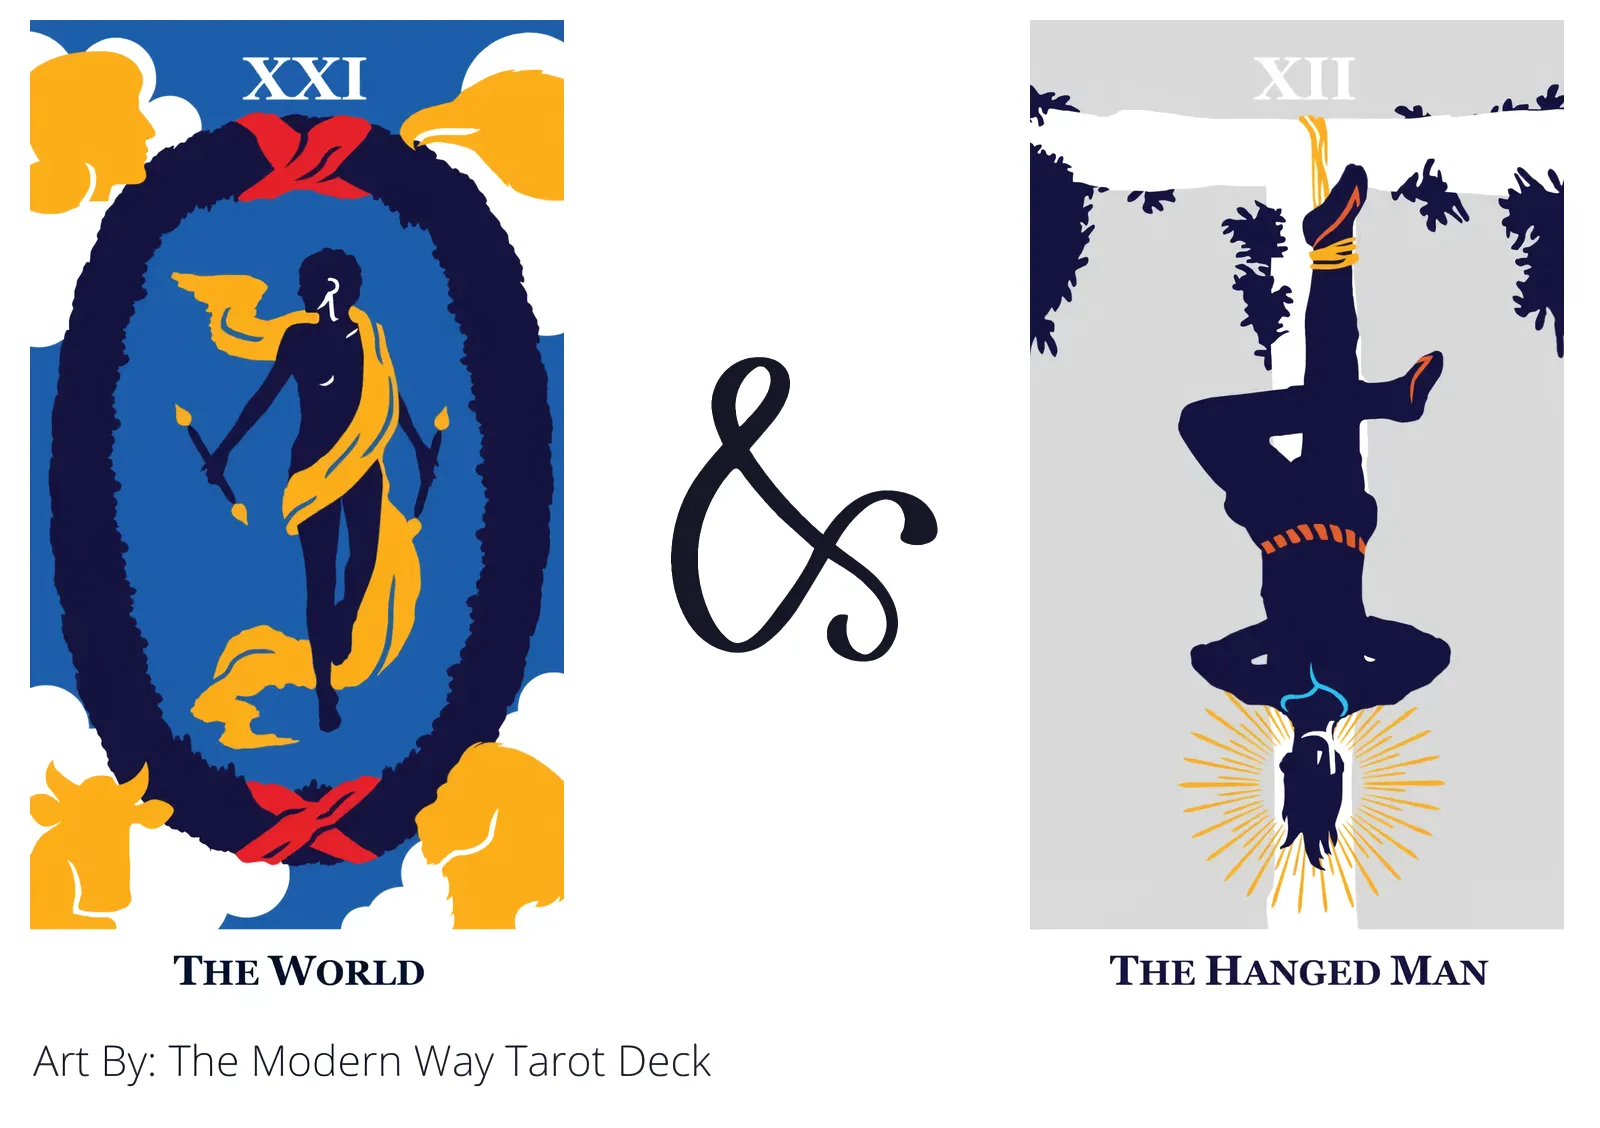 the world and the hanged man tarot cards together